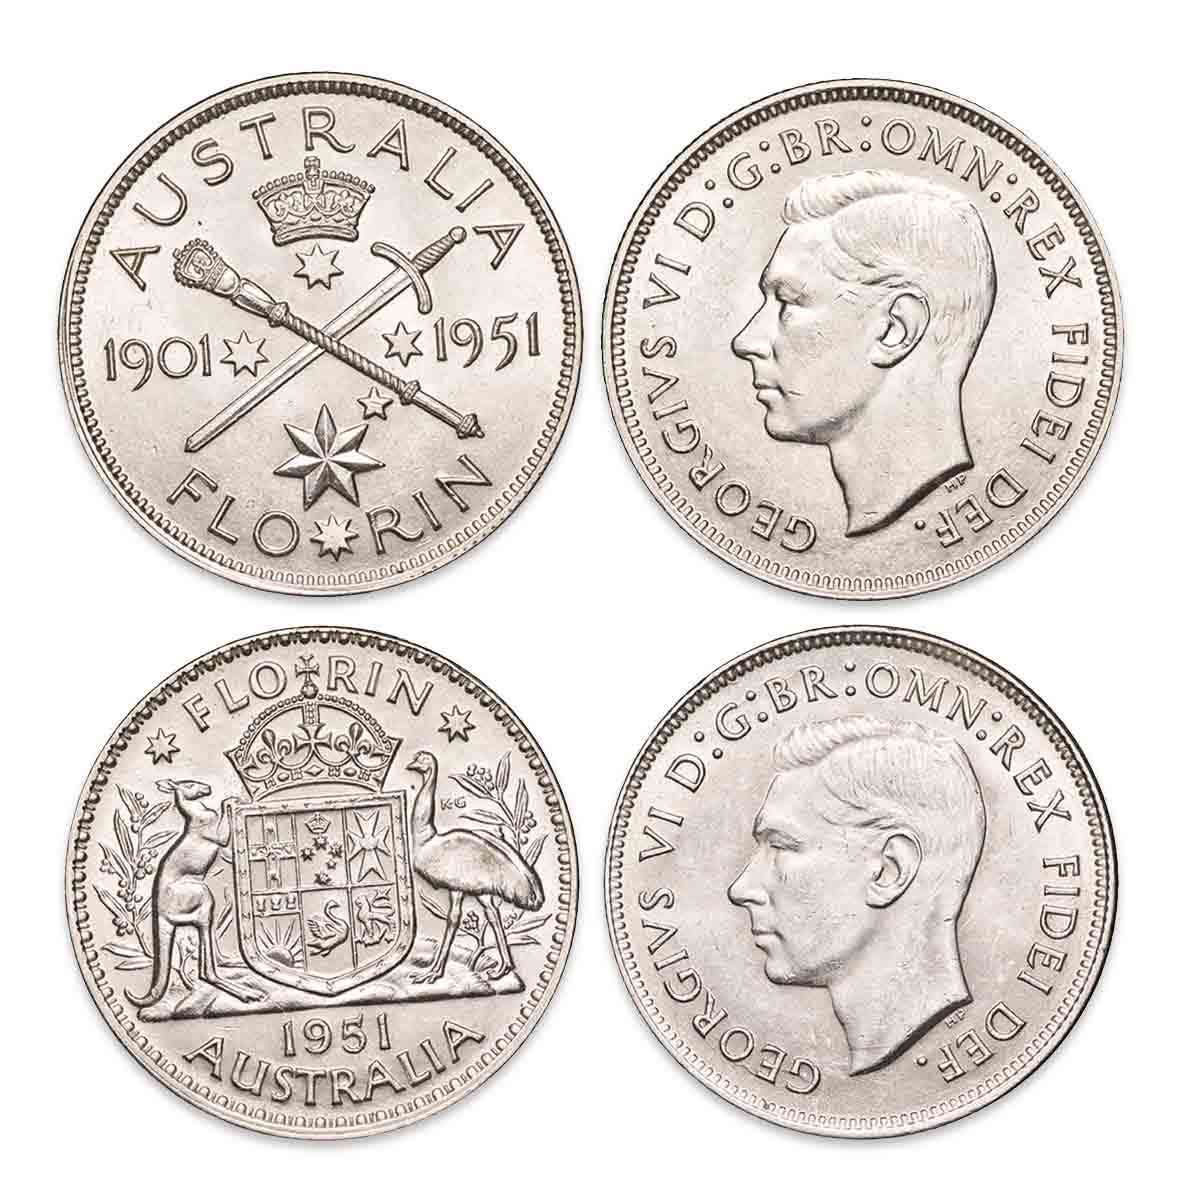 1951 Florin & 1951 Federation Florin Pair about Uncirculated